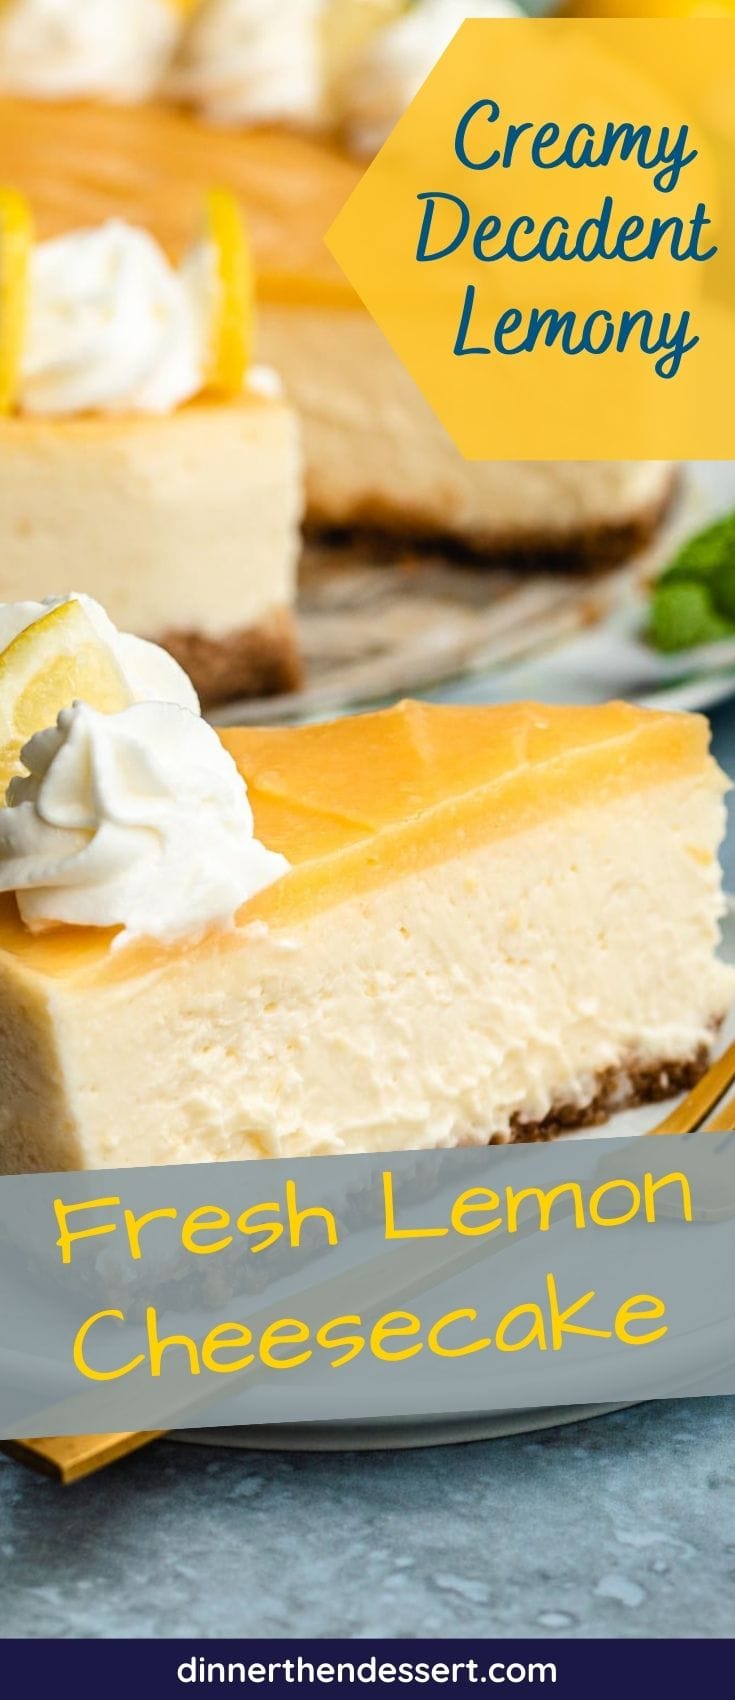 Lemon Cheesecake finished cheesecake slice on plate with recipe title across bottom